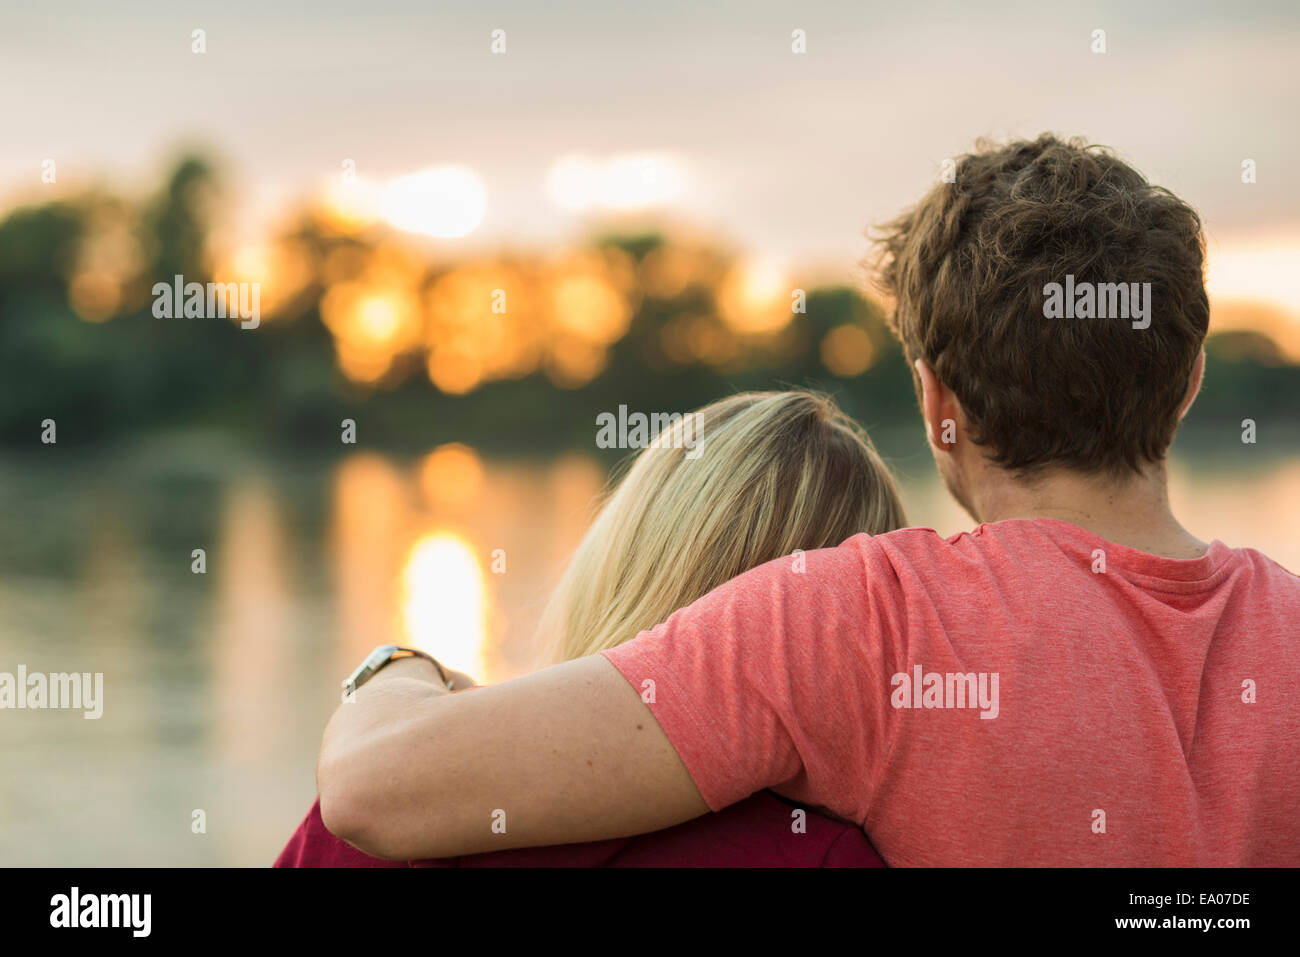 Young couple, man with arm around woman, rear view Stock Photo